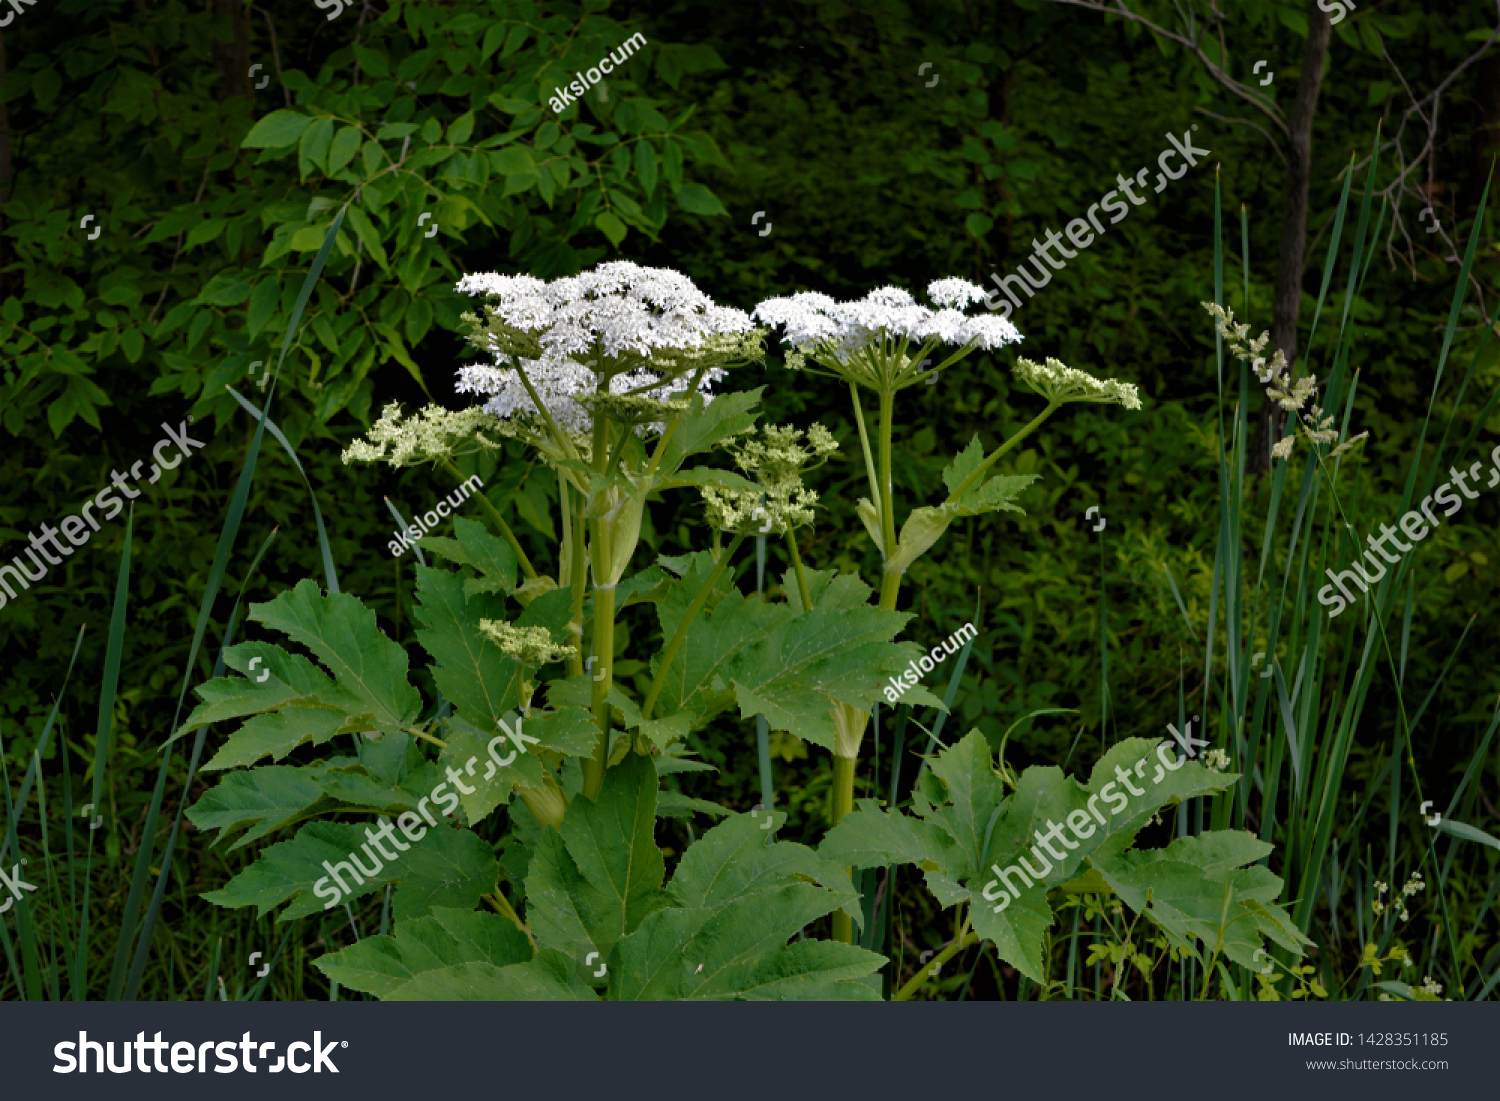 Heracleum mantegazzianum, commonly known as giant hogweed, is a monocarpic perennial herbaceous flowering plant in the family Apiaceae. cartwheel-flower, giant cow parsley, giant cow parsnip, hogsbain #1428351185